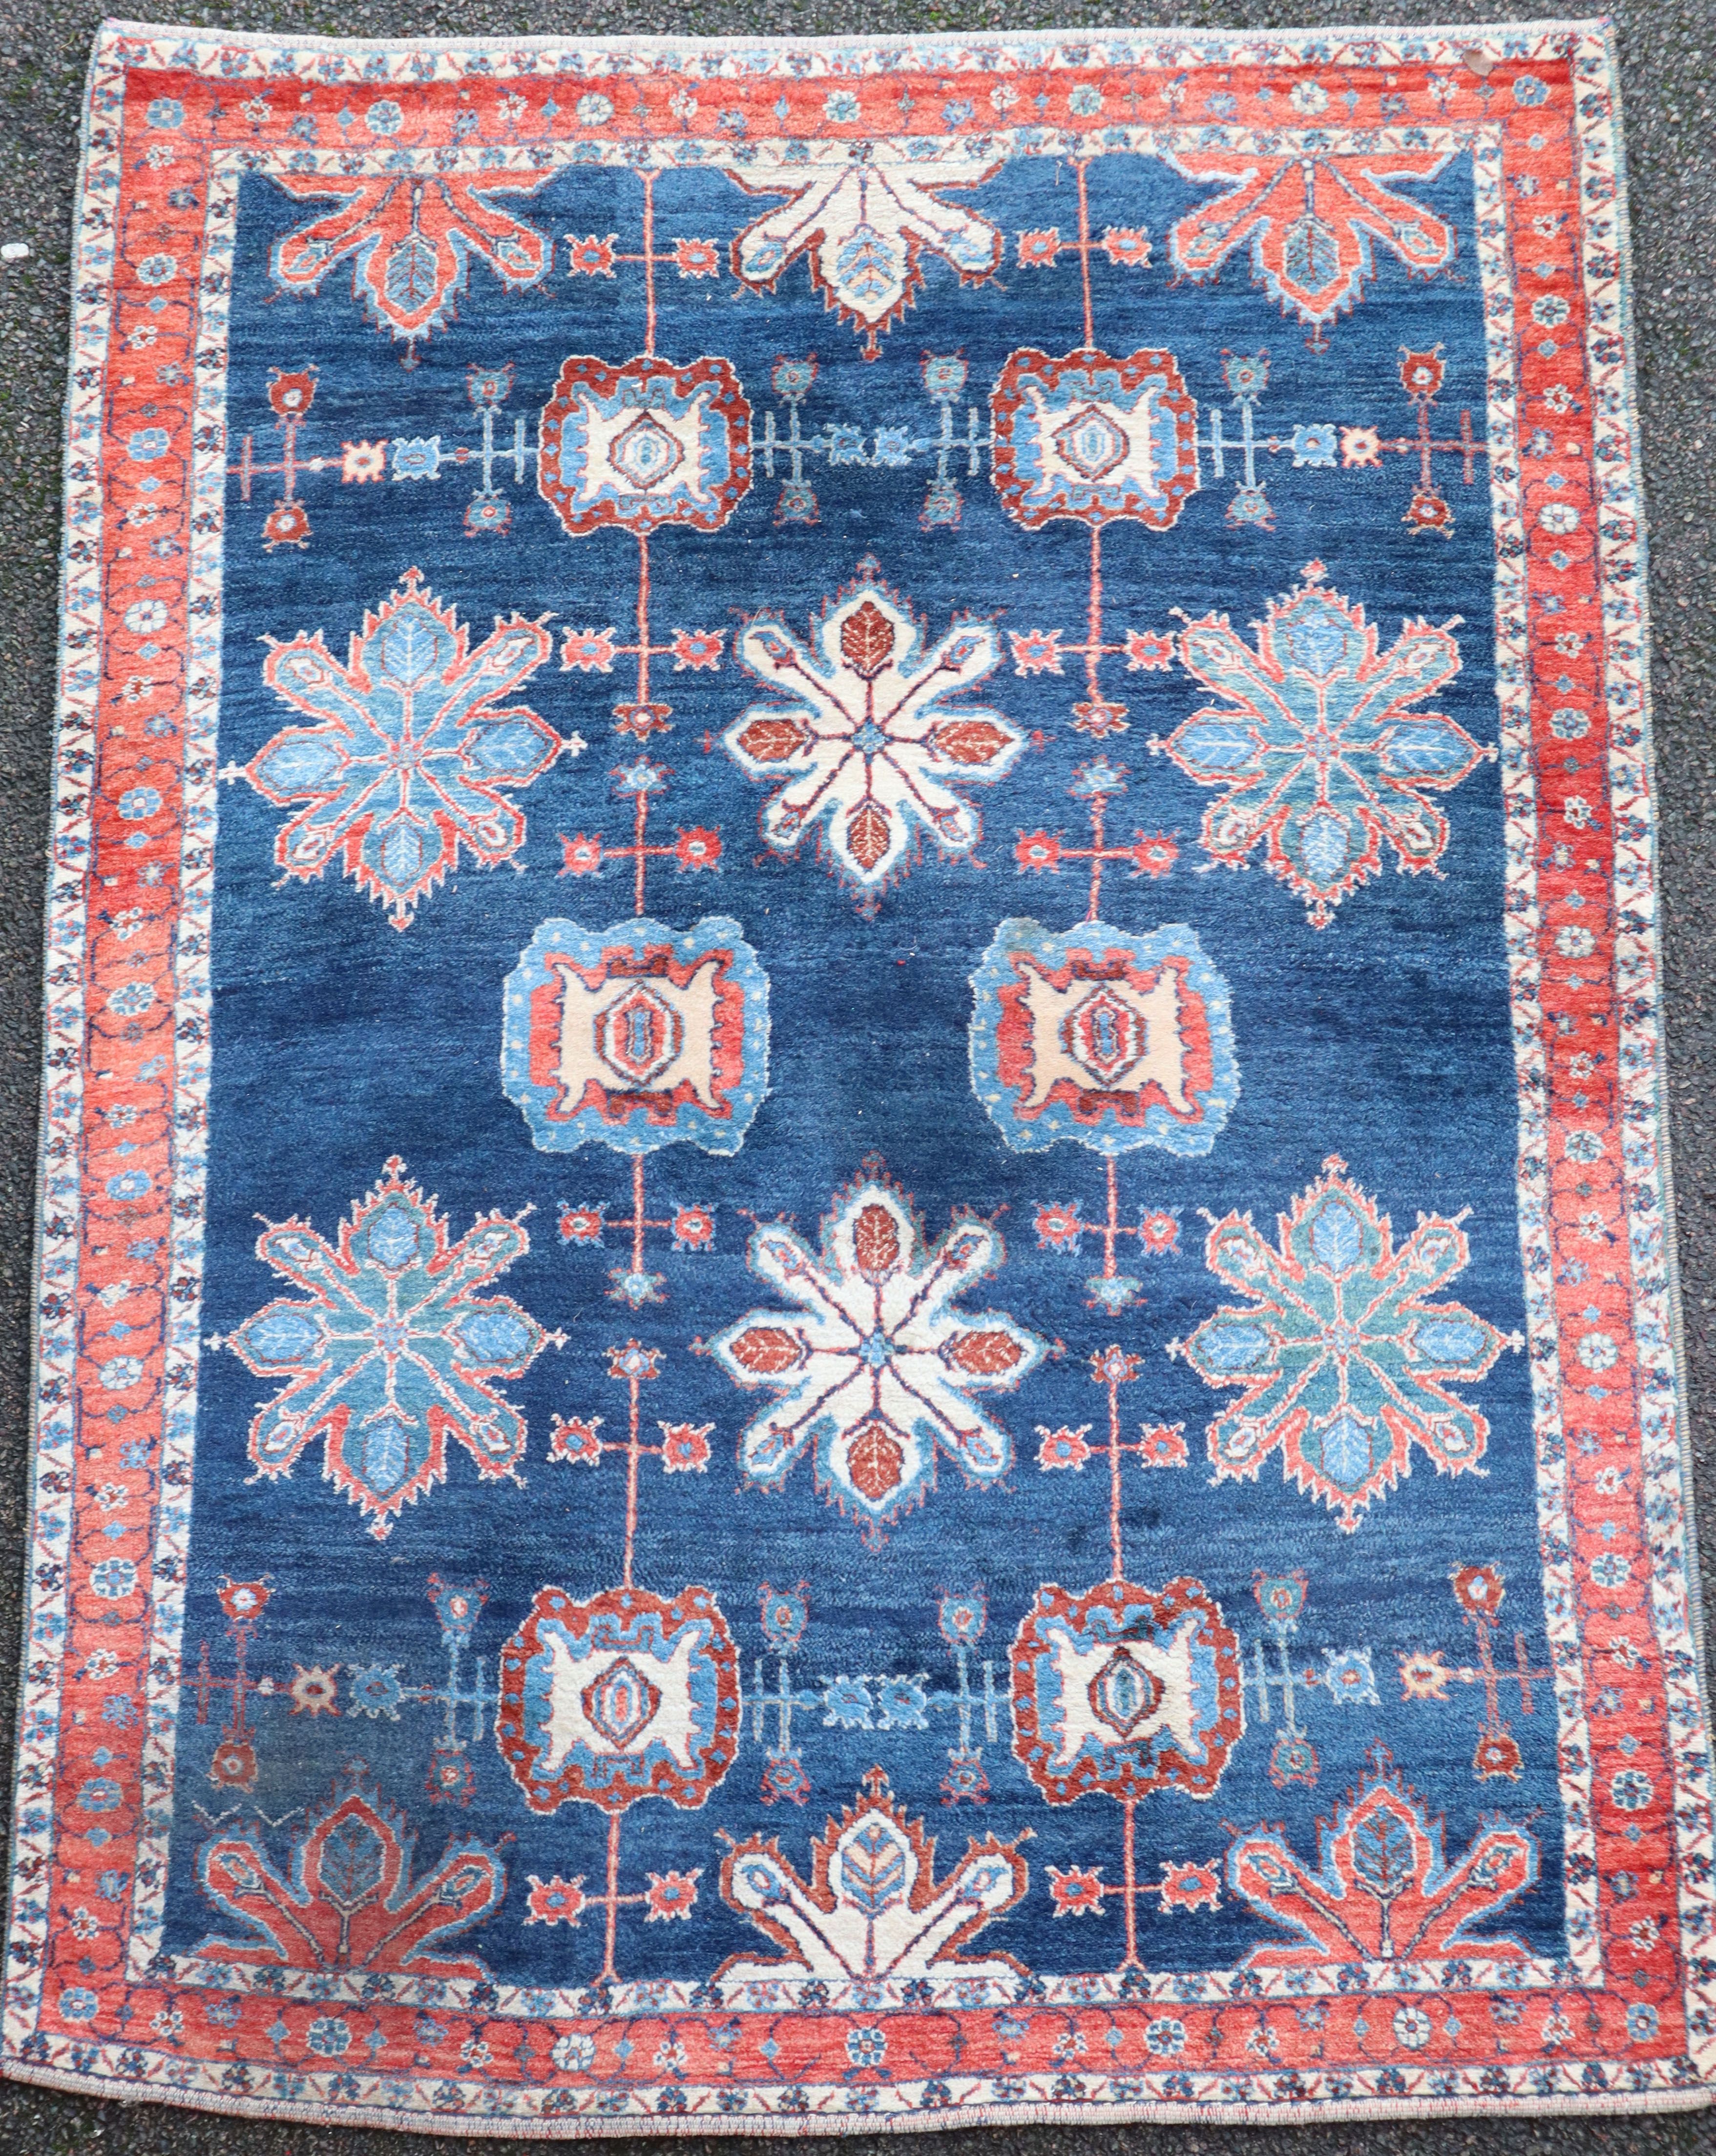 An Iranian Loribaft blue ground rug, with field of floral motifs and three row border, 225 x